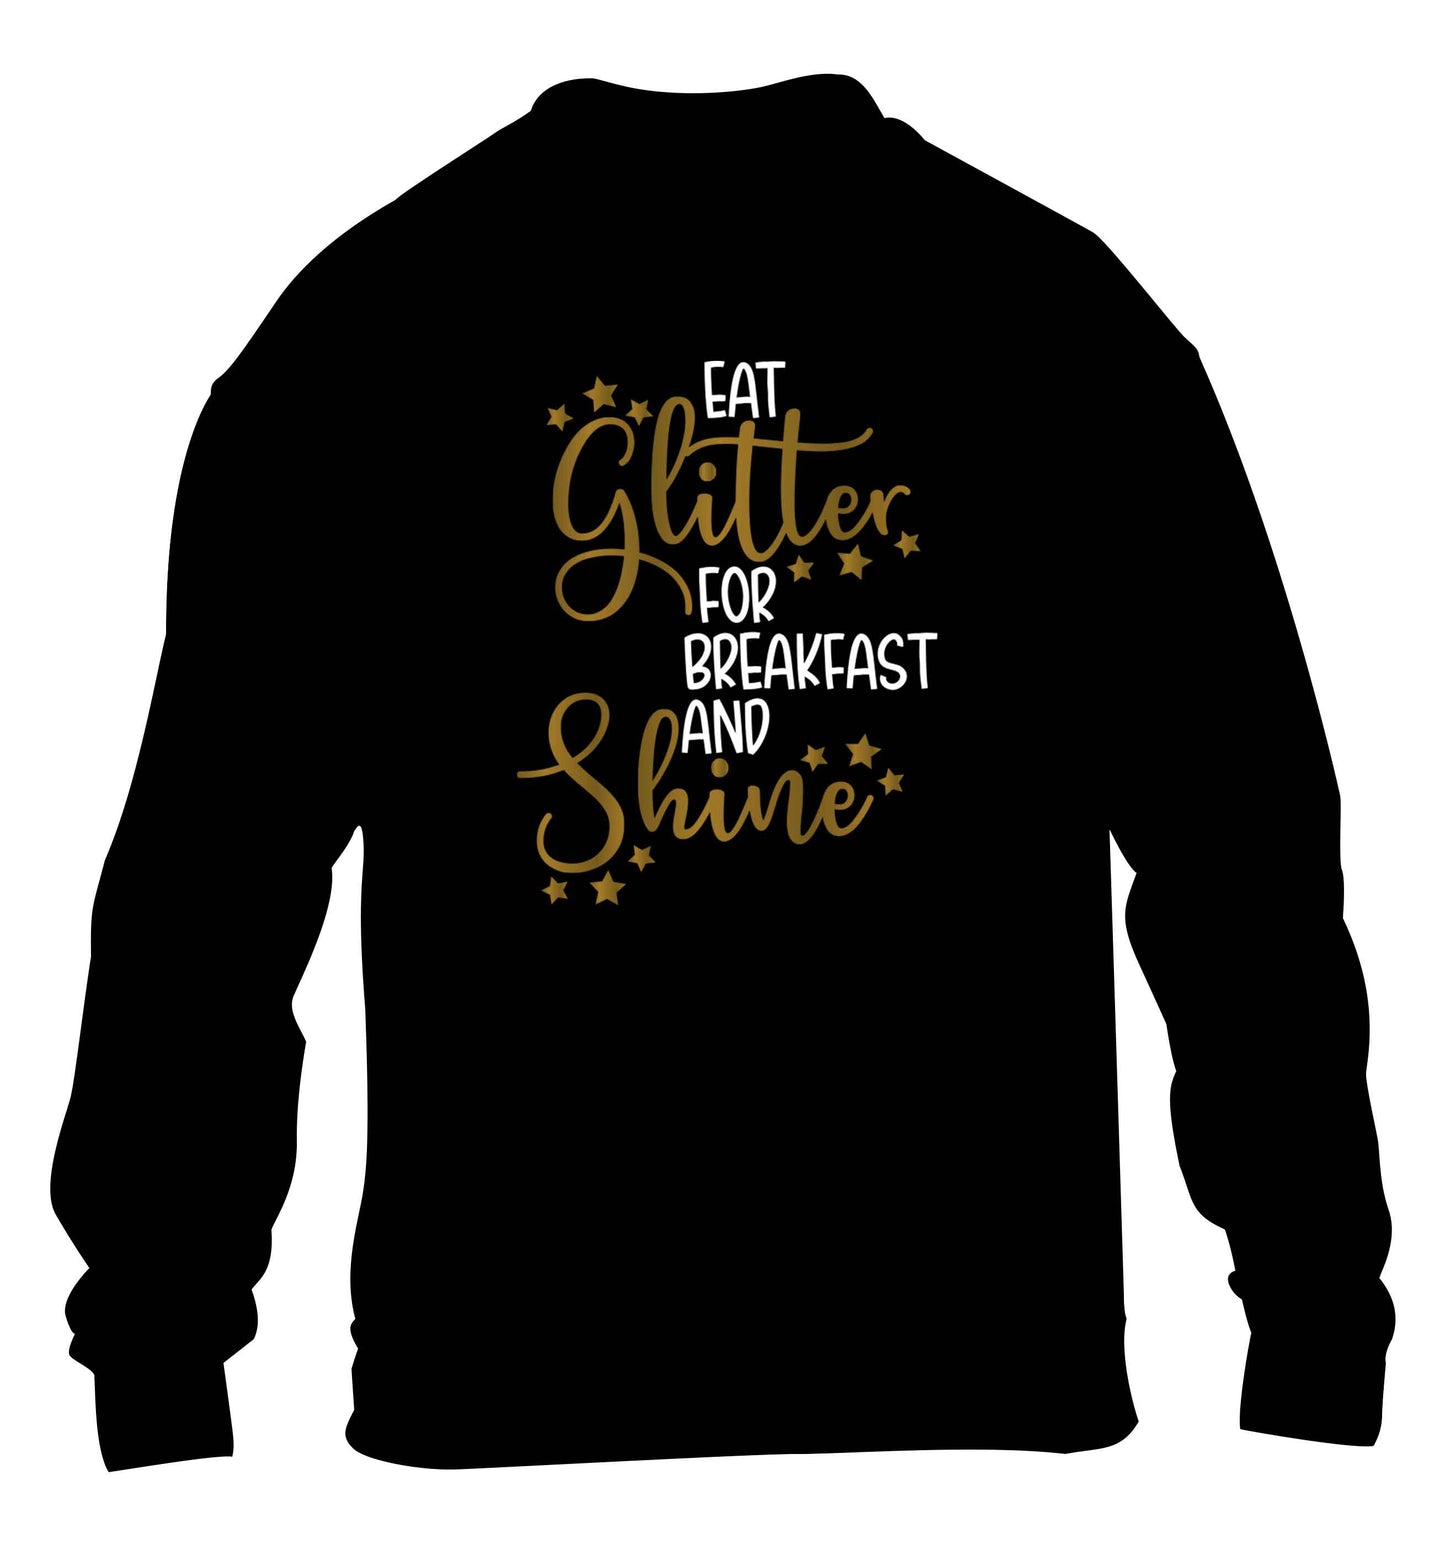 Eat glitter for breakfast and shine all day children's black sweater 12-13 Years